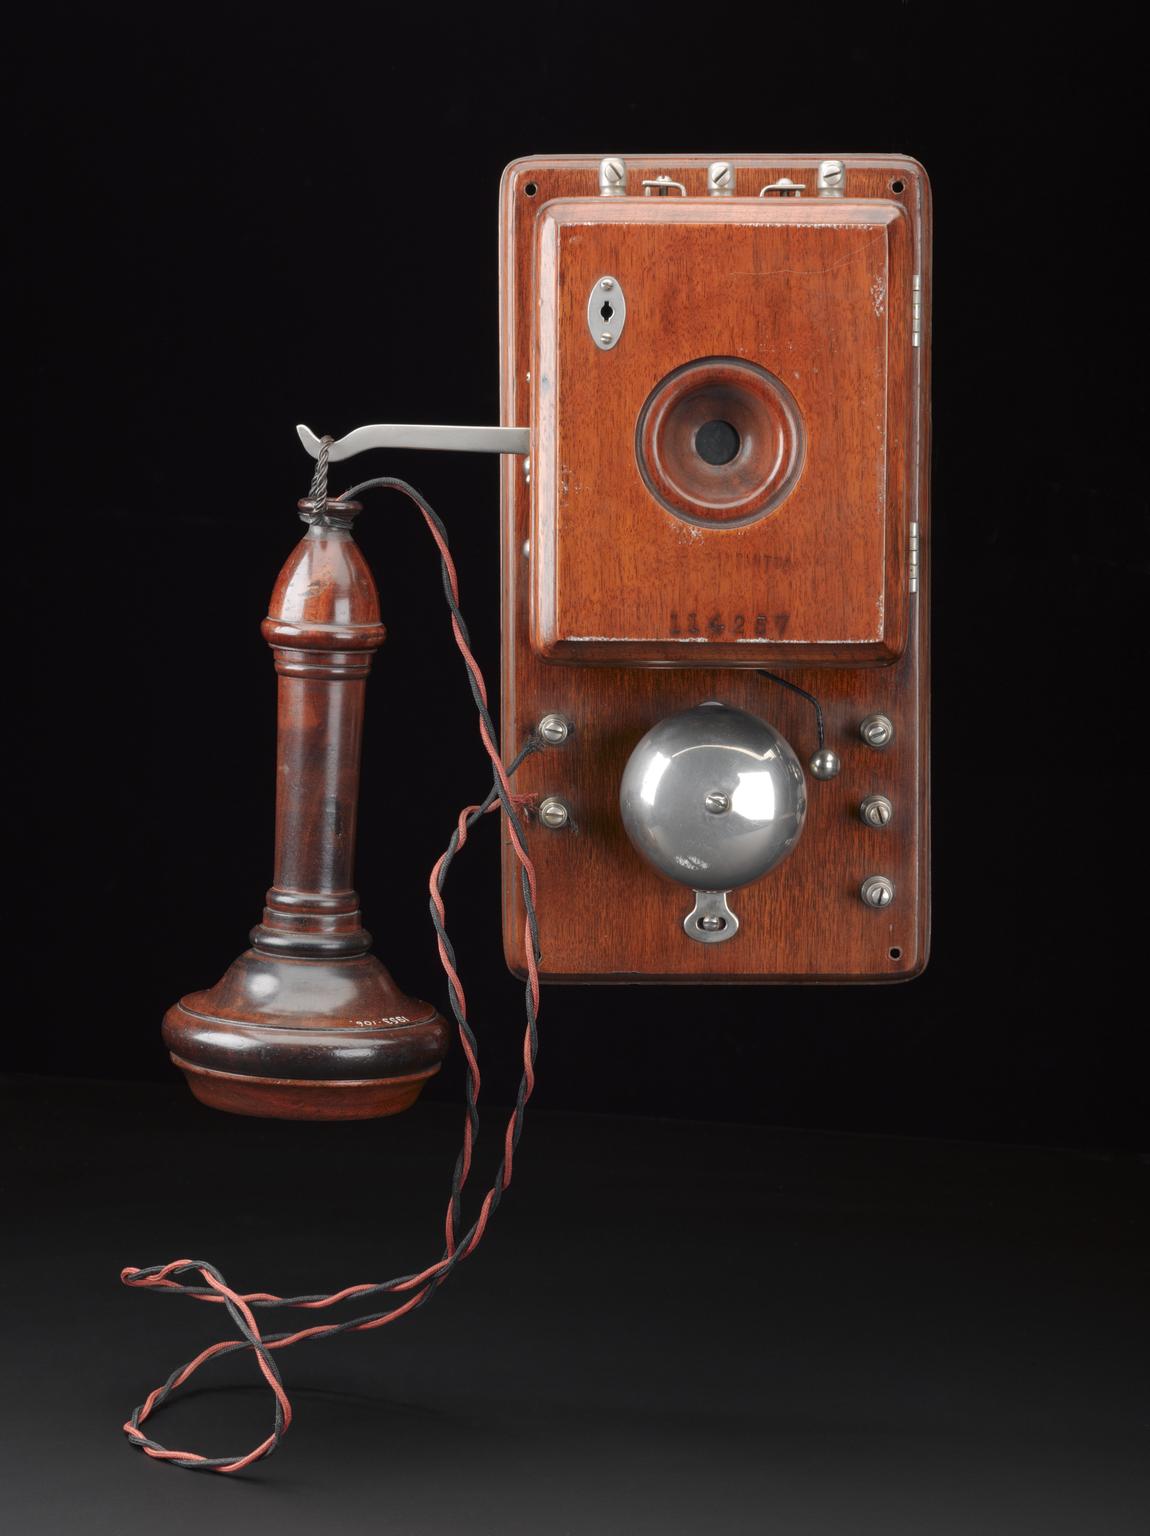 Bell telephone receiver, mahogany case, made by the India Rubber, Gutta-Percha and Telegraph Works Company Limited, Silvertown, Newham, London, England, 1878.